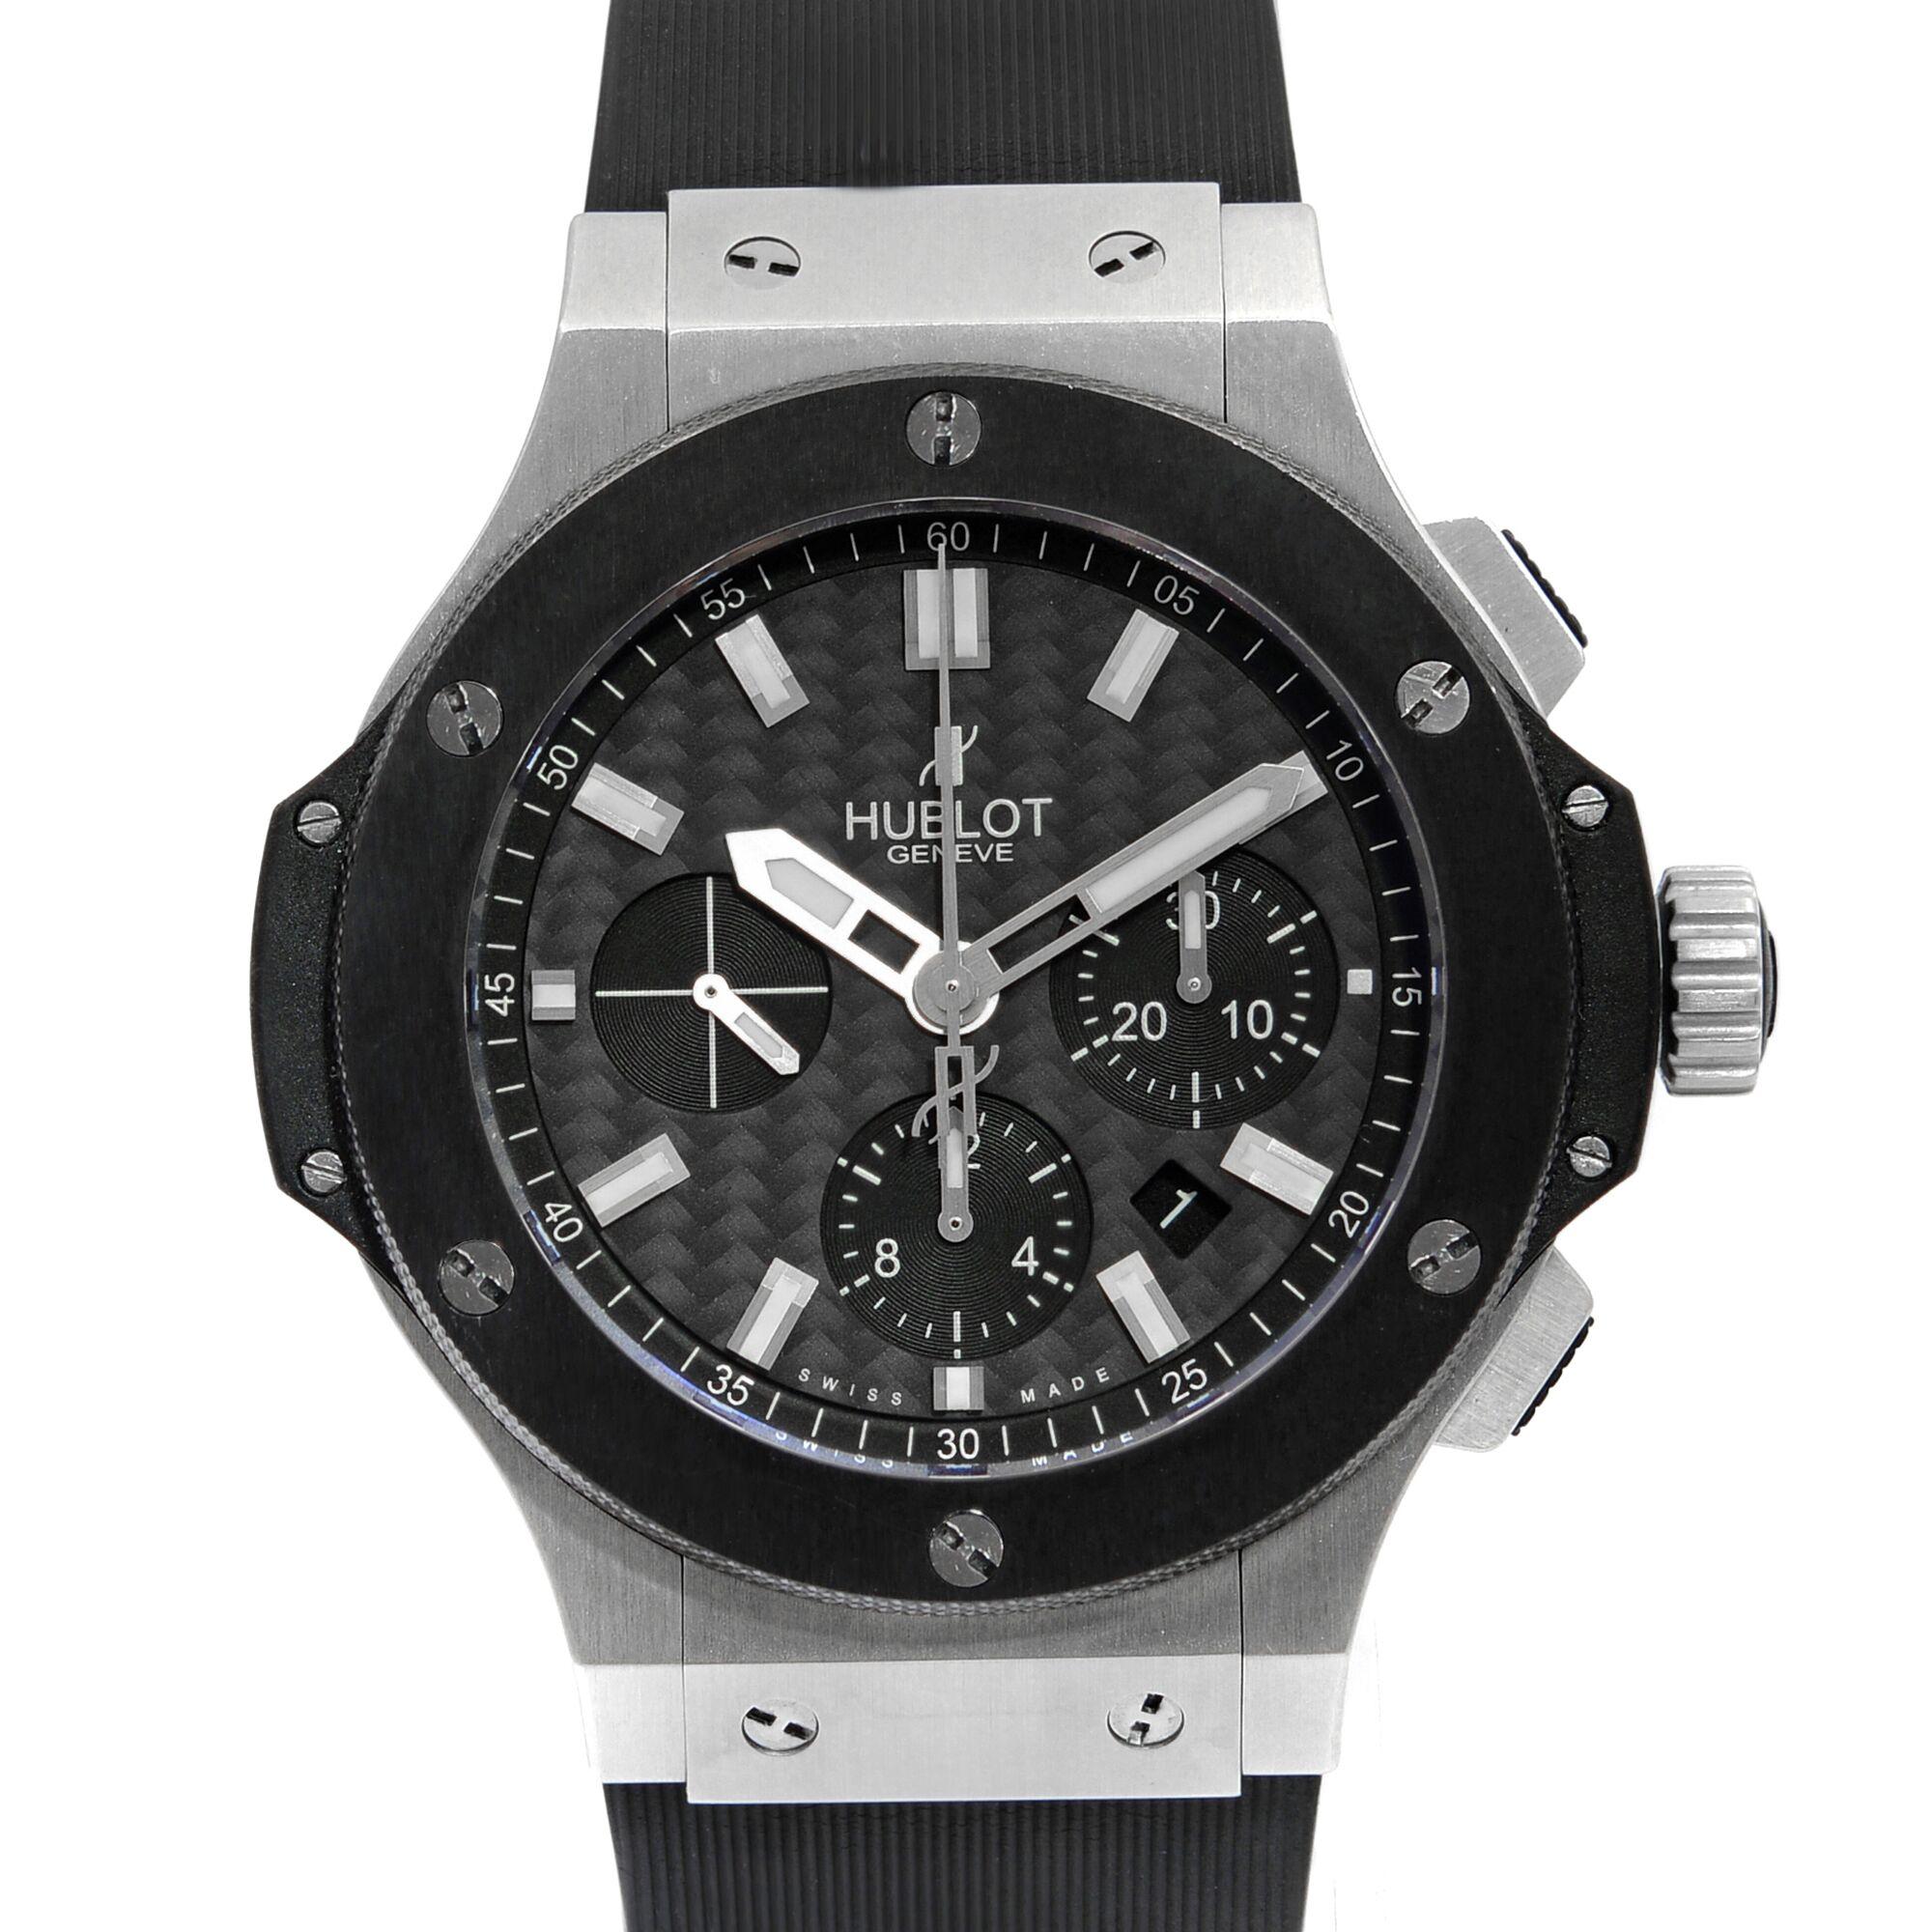 Never worn. Store Display Model. Have serial tag. and protective plastic case.

  Brand: Hublot  Type: Wristwatch  Department: Men  Model Number: 301.SM.1770.RX  Country/Region of Manufacture: Switzerland  Style: Luxury  Model: Hublot Big Bang 